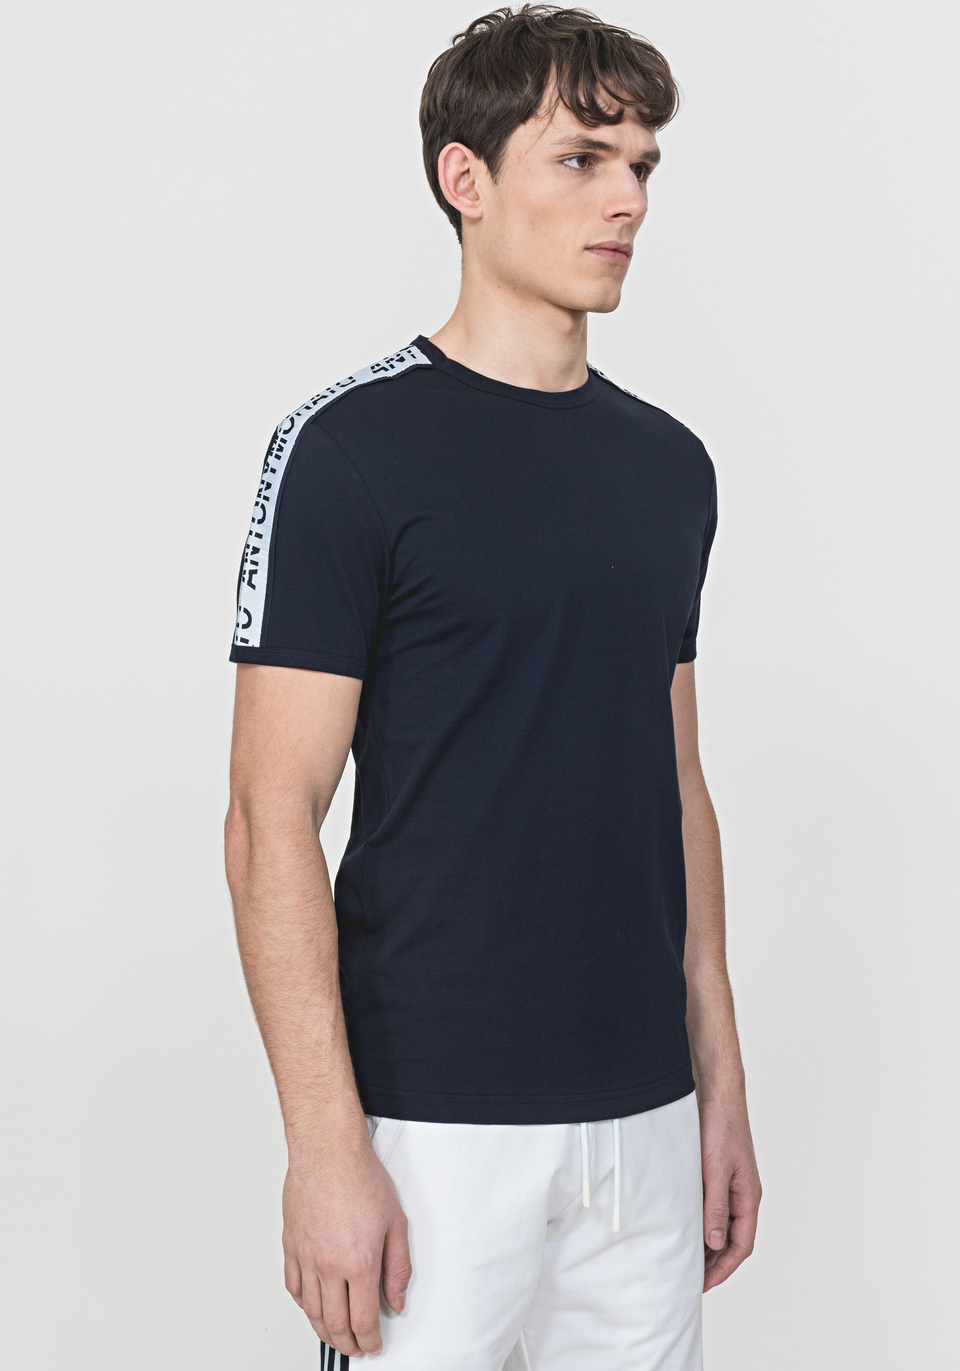 REGULAR-FIT T-SHIRT MADE FROM SOFT COTTON IN PLAIN HUES - Antony Morato Online Shop